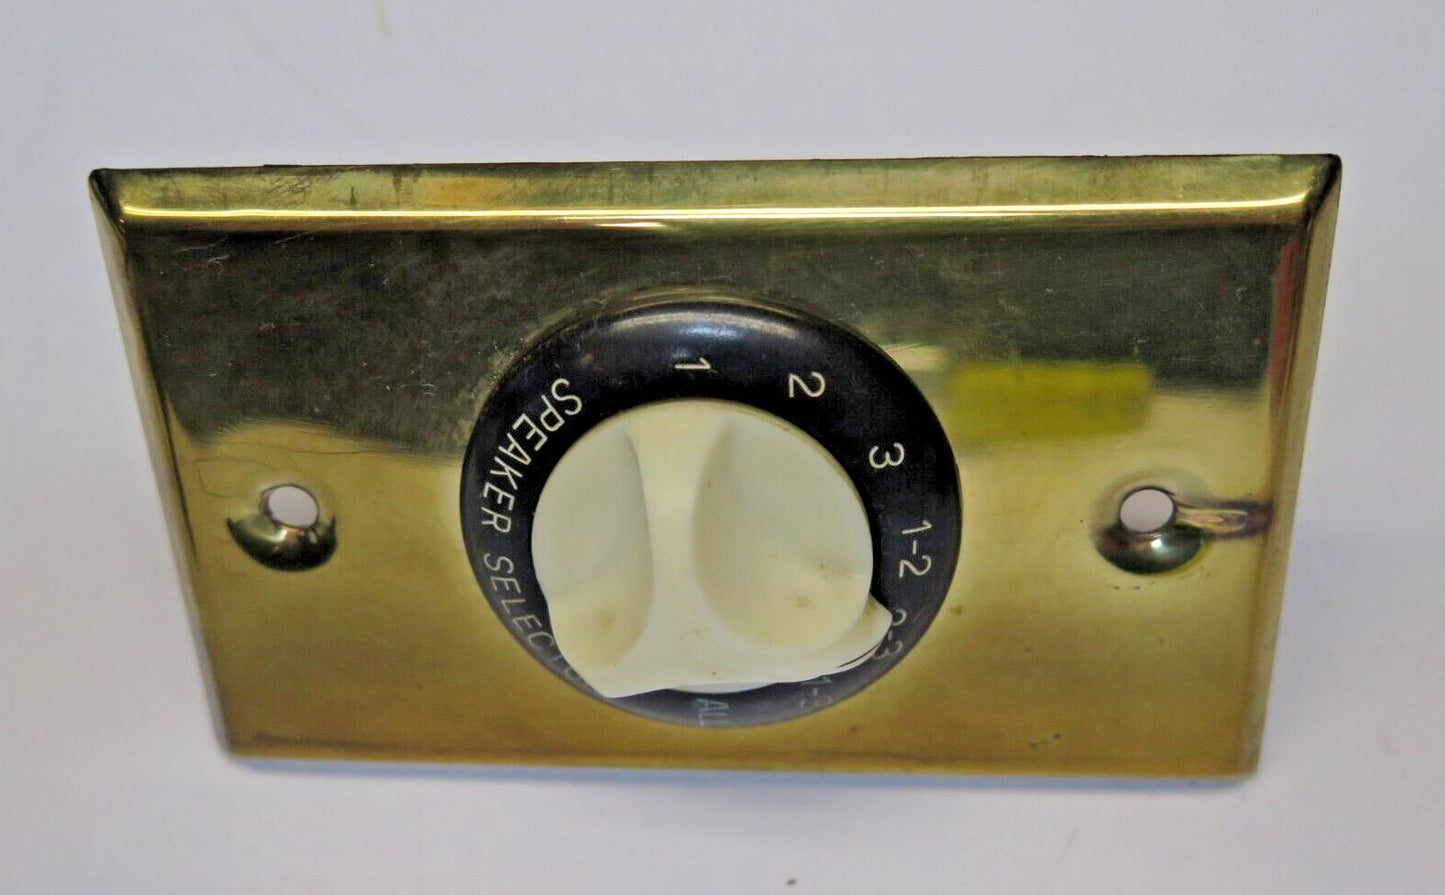 Vintage Audiotex Stereo Speaker Selector Wall Switch - Gold Tone Single Gang